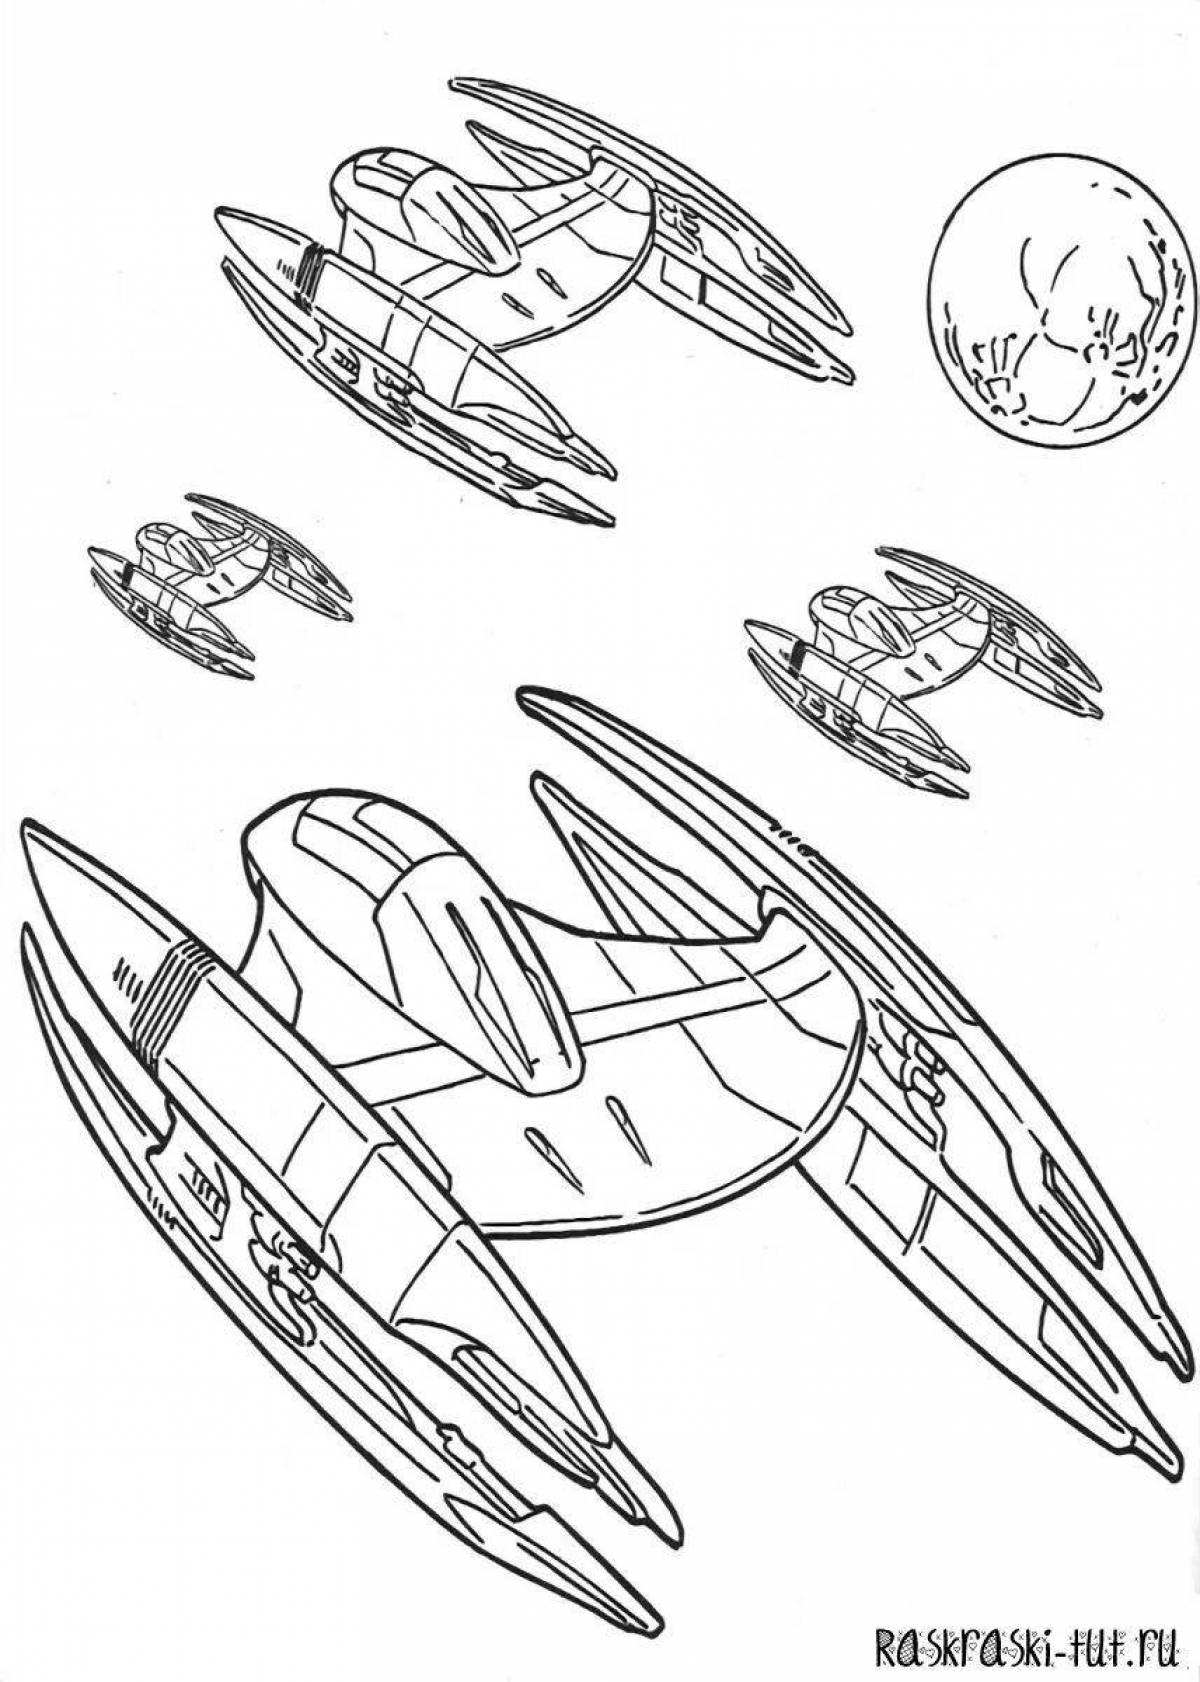 Flawless spaceship coloring page